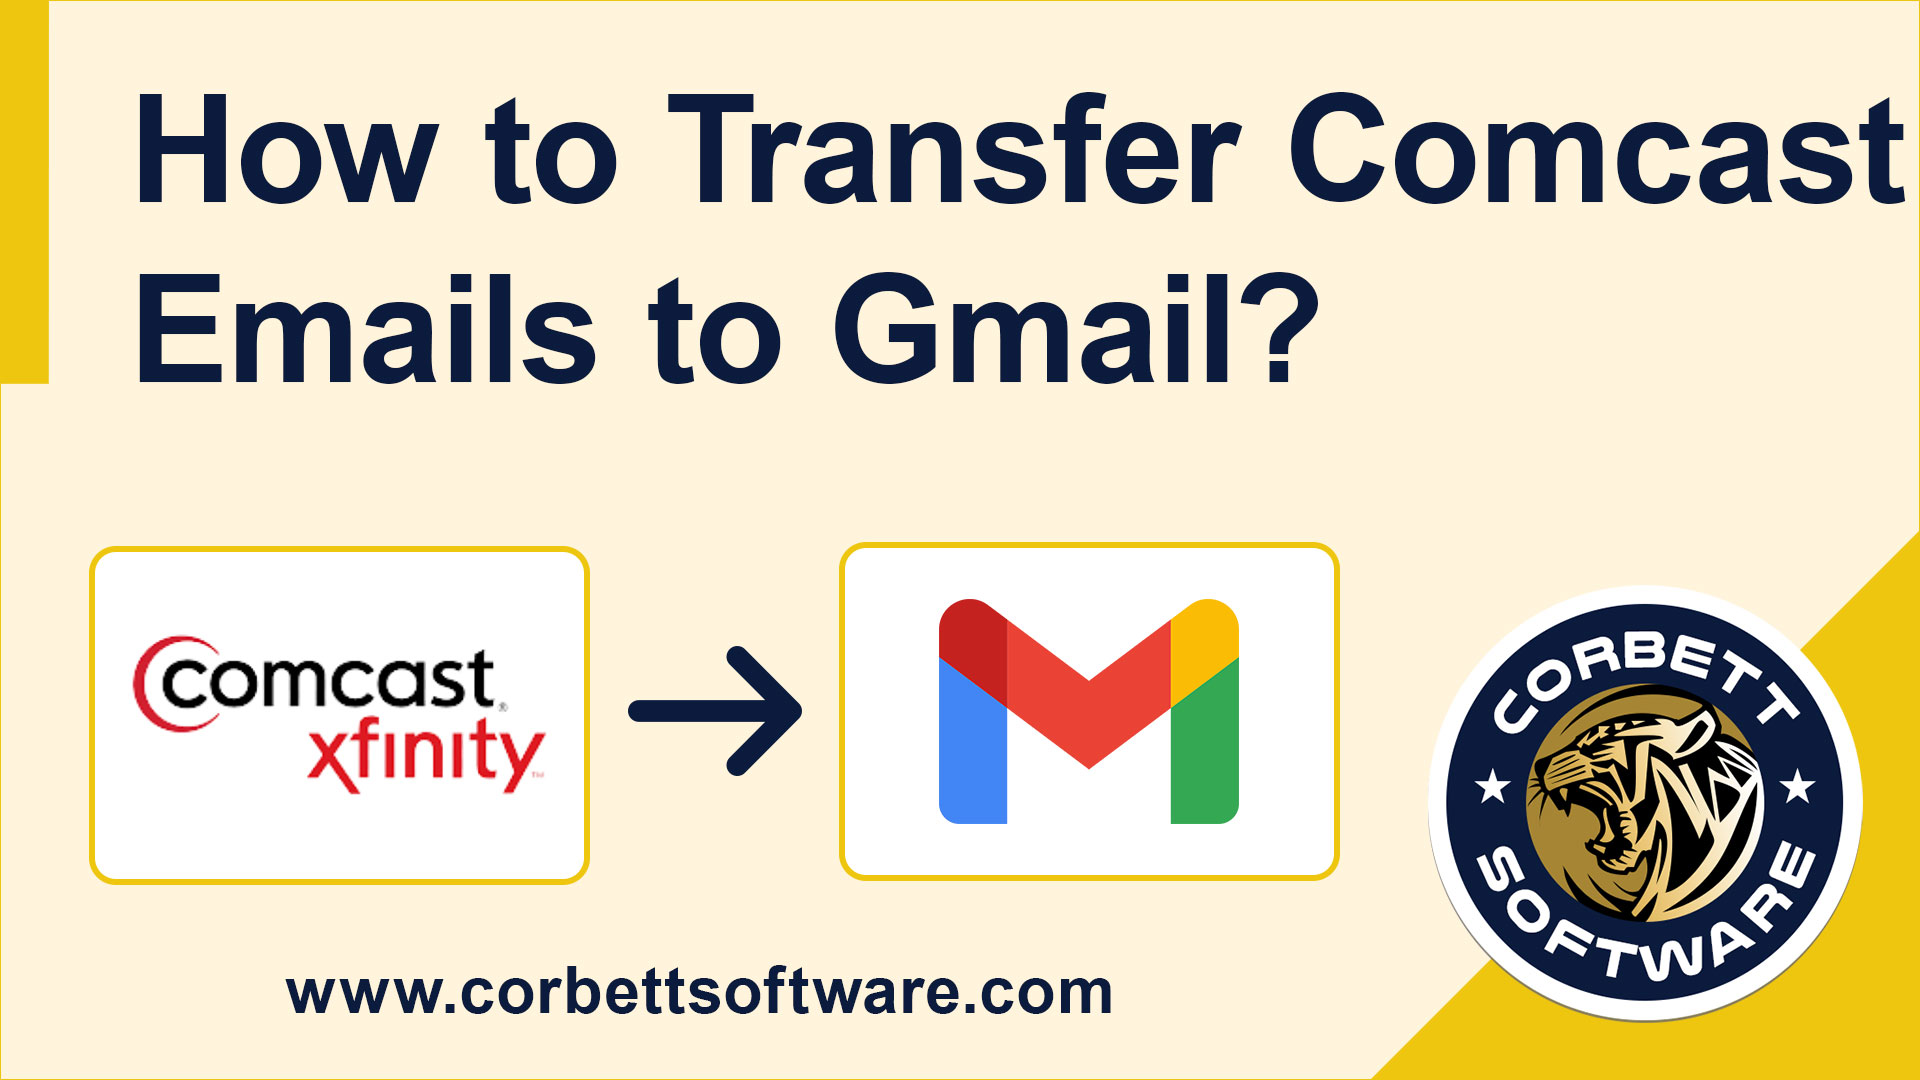 Transfer Comcast emails to Gmail Account